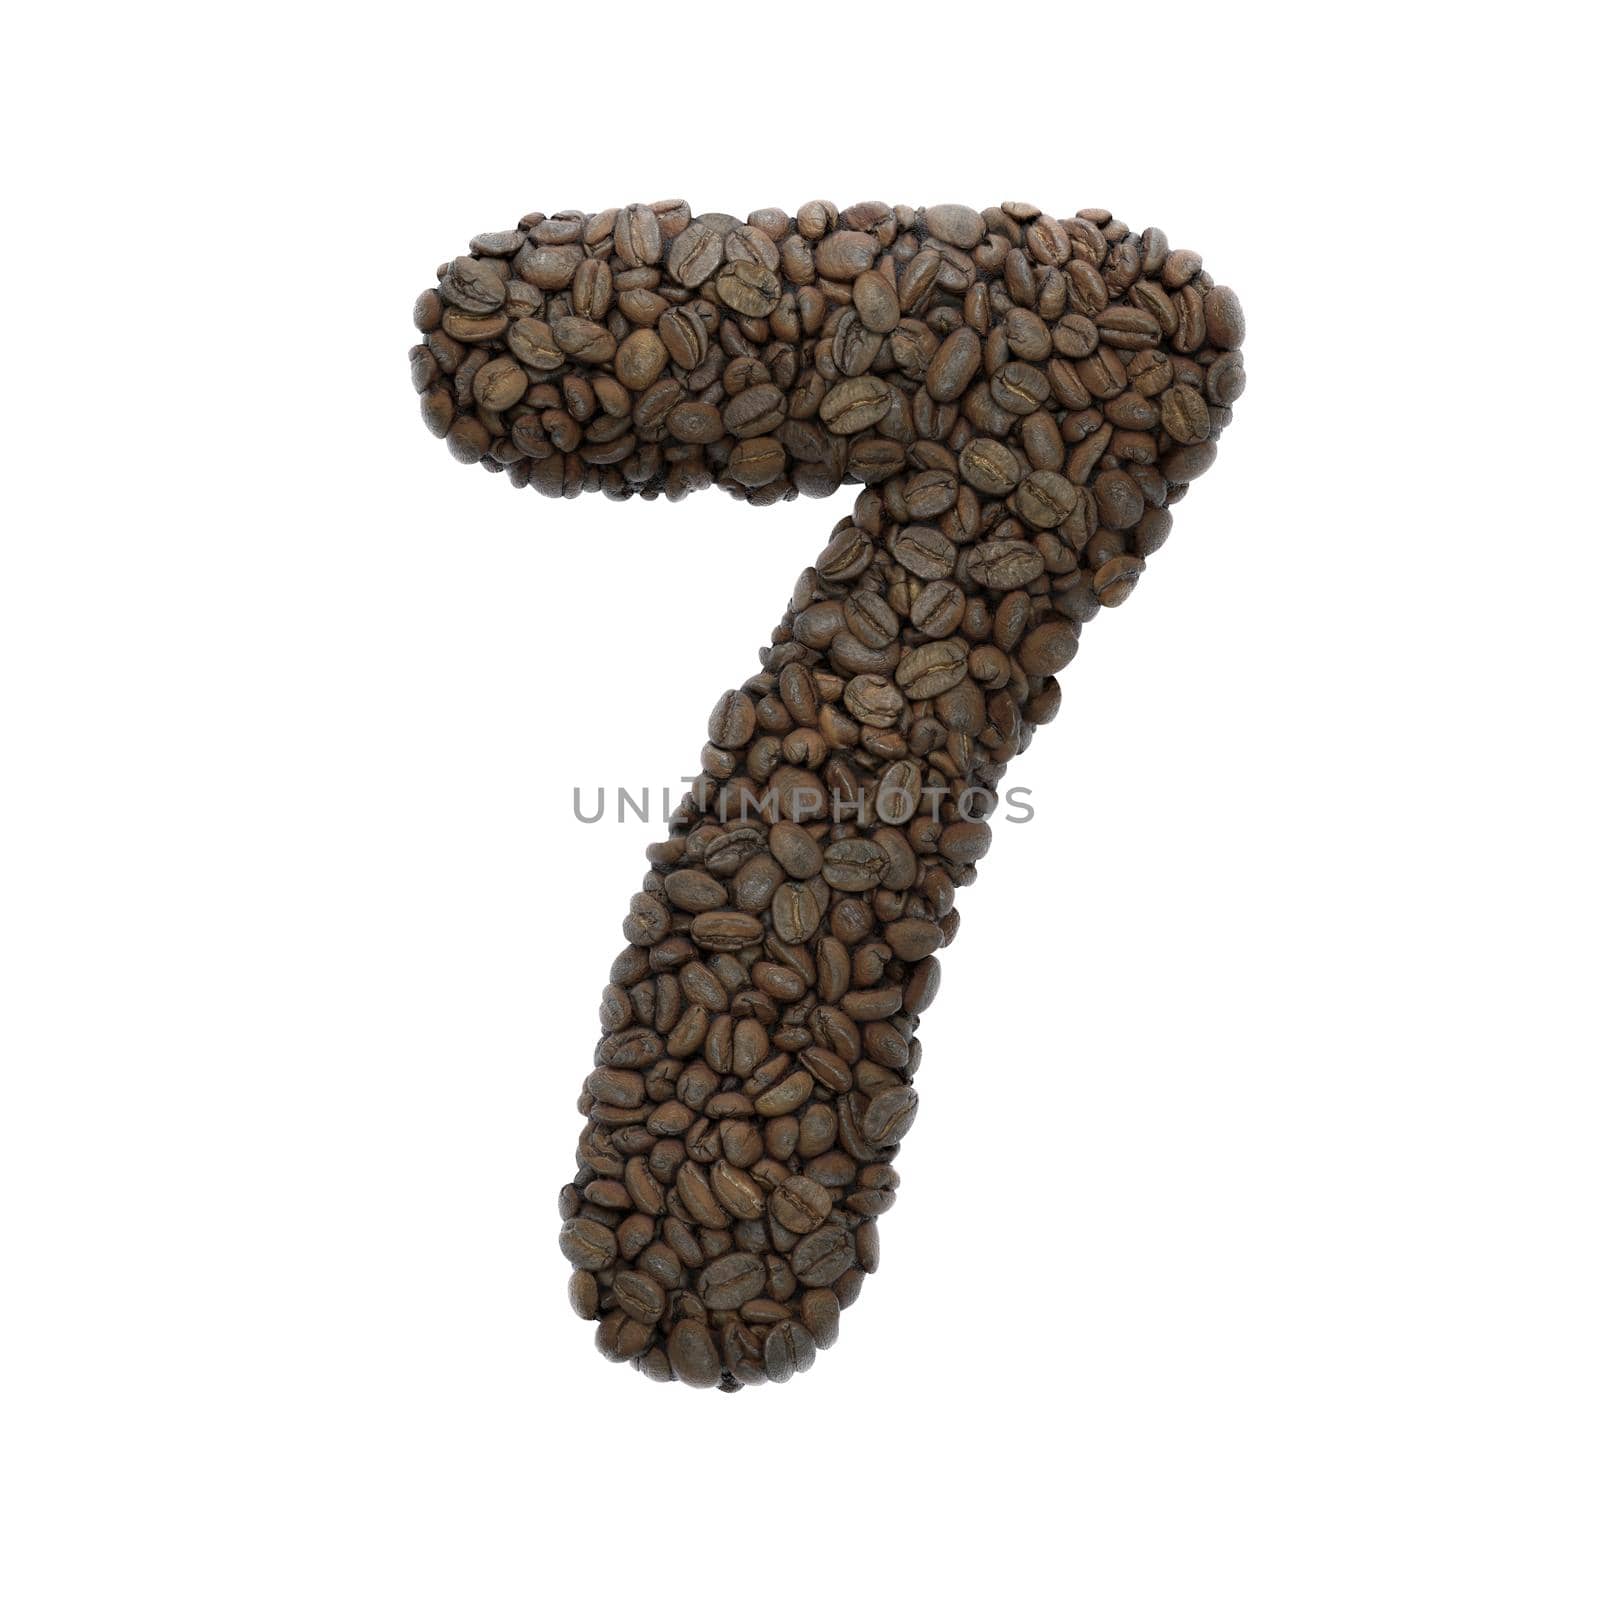 Coffee number 7 -  3d roasted beans digit - Suitable for Coffee, energy or insomnia related subjects by chrisroll